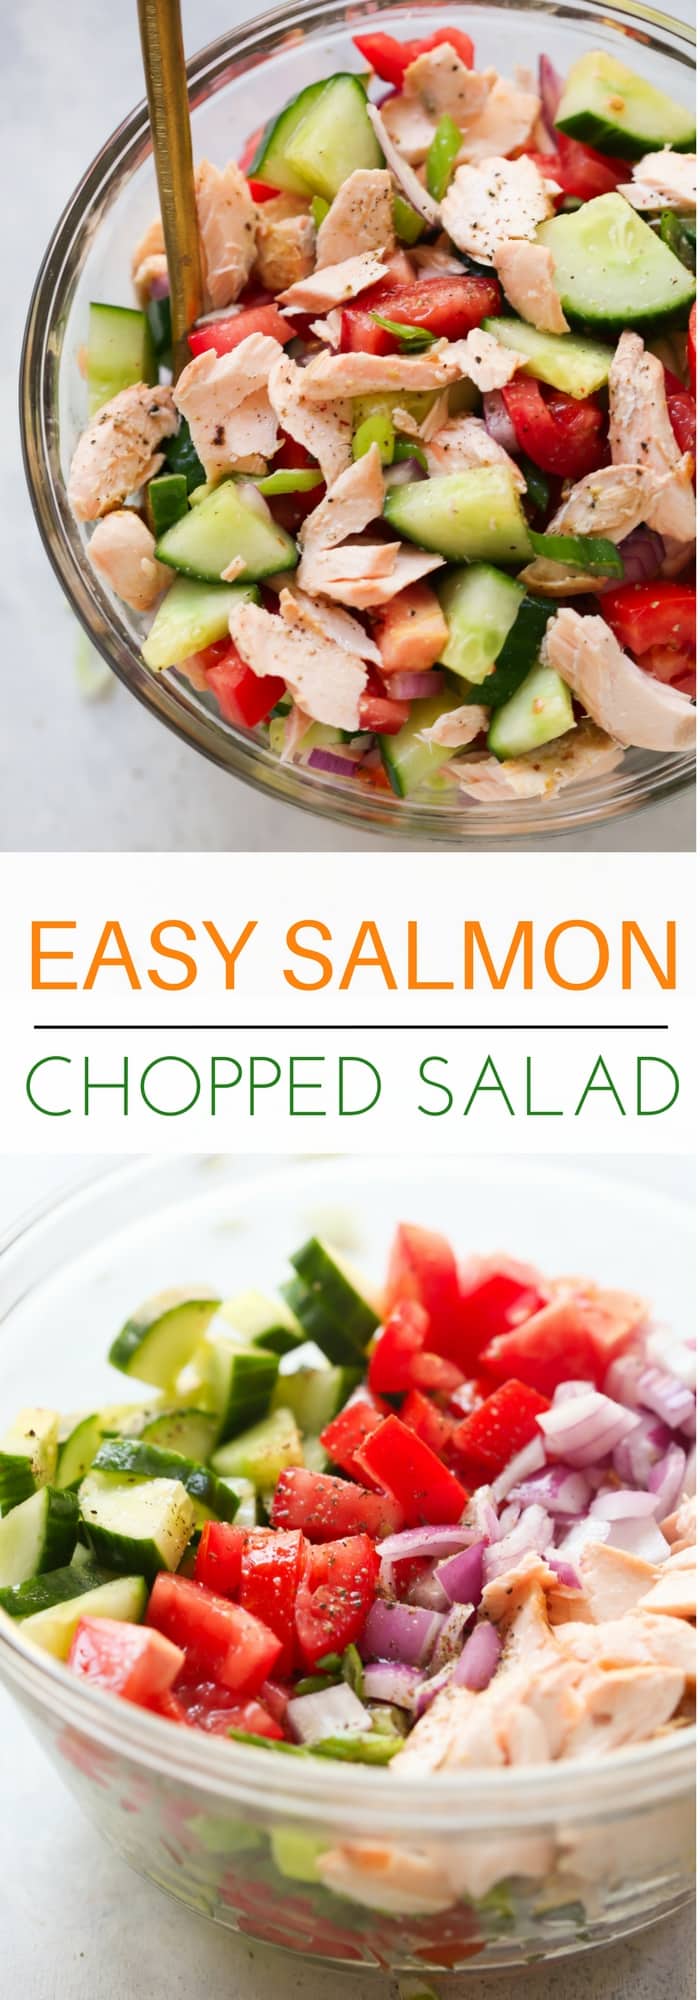 Salmon Chopped Salad - This Salmon Chopped Salad Recipe is quick and easy to make, packed with protein, healthy fats and it’s flavoured with lemon vinaigrette.